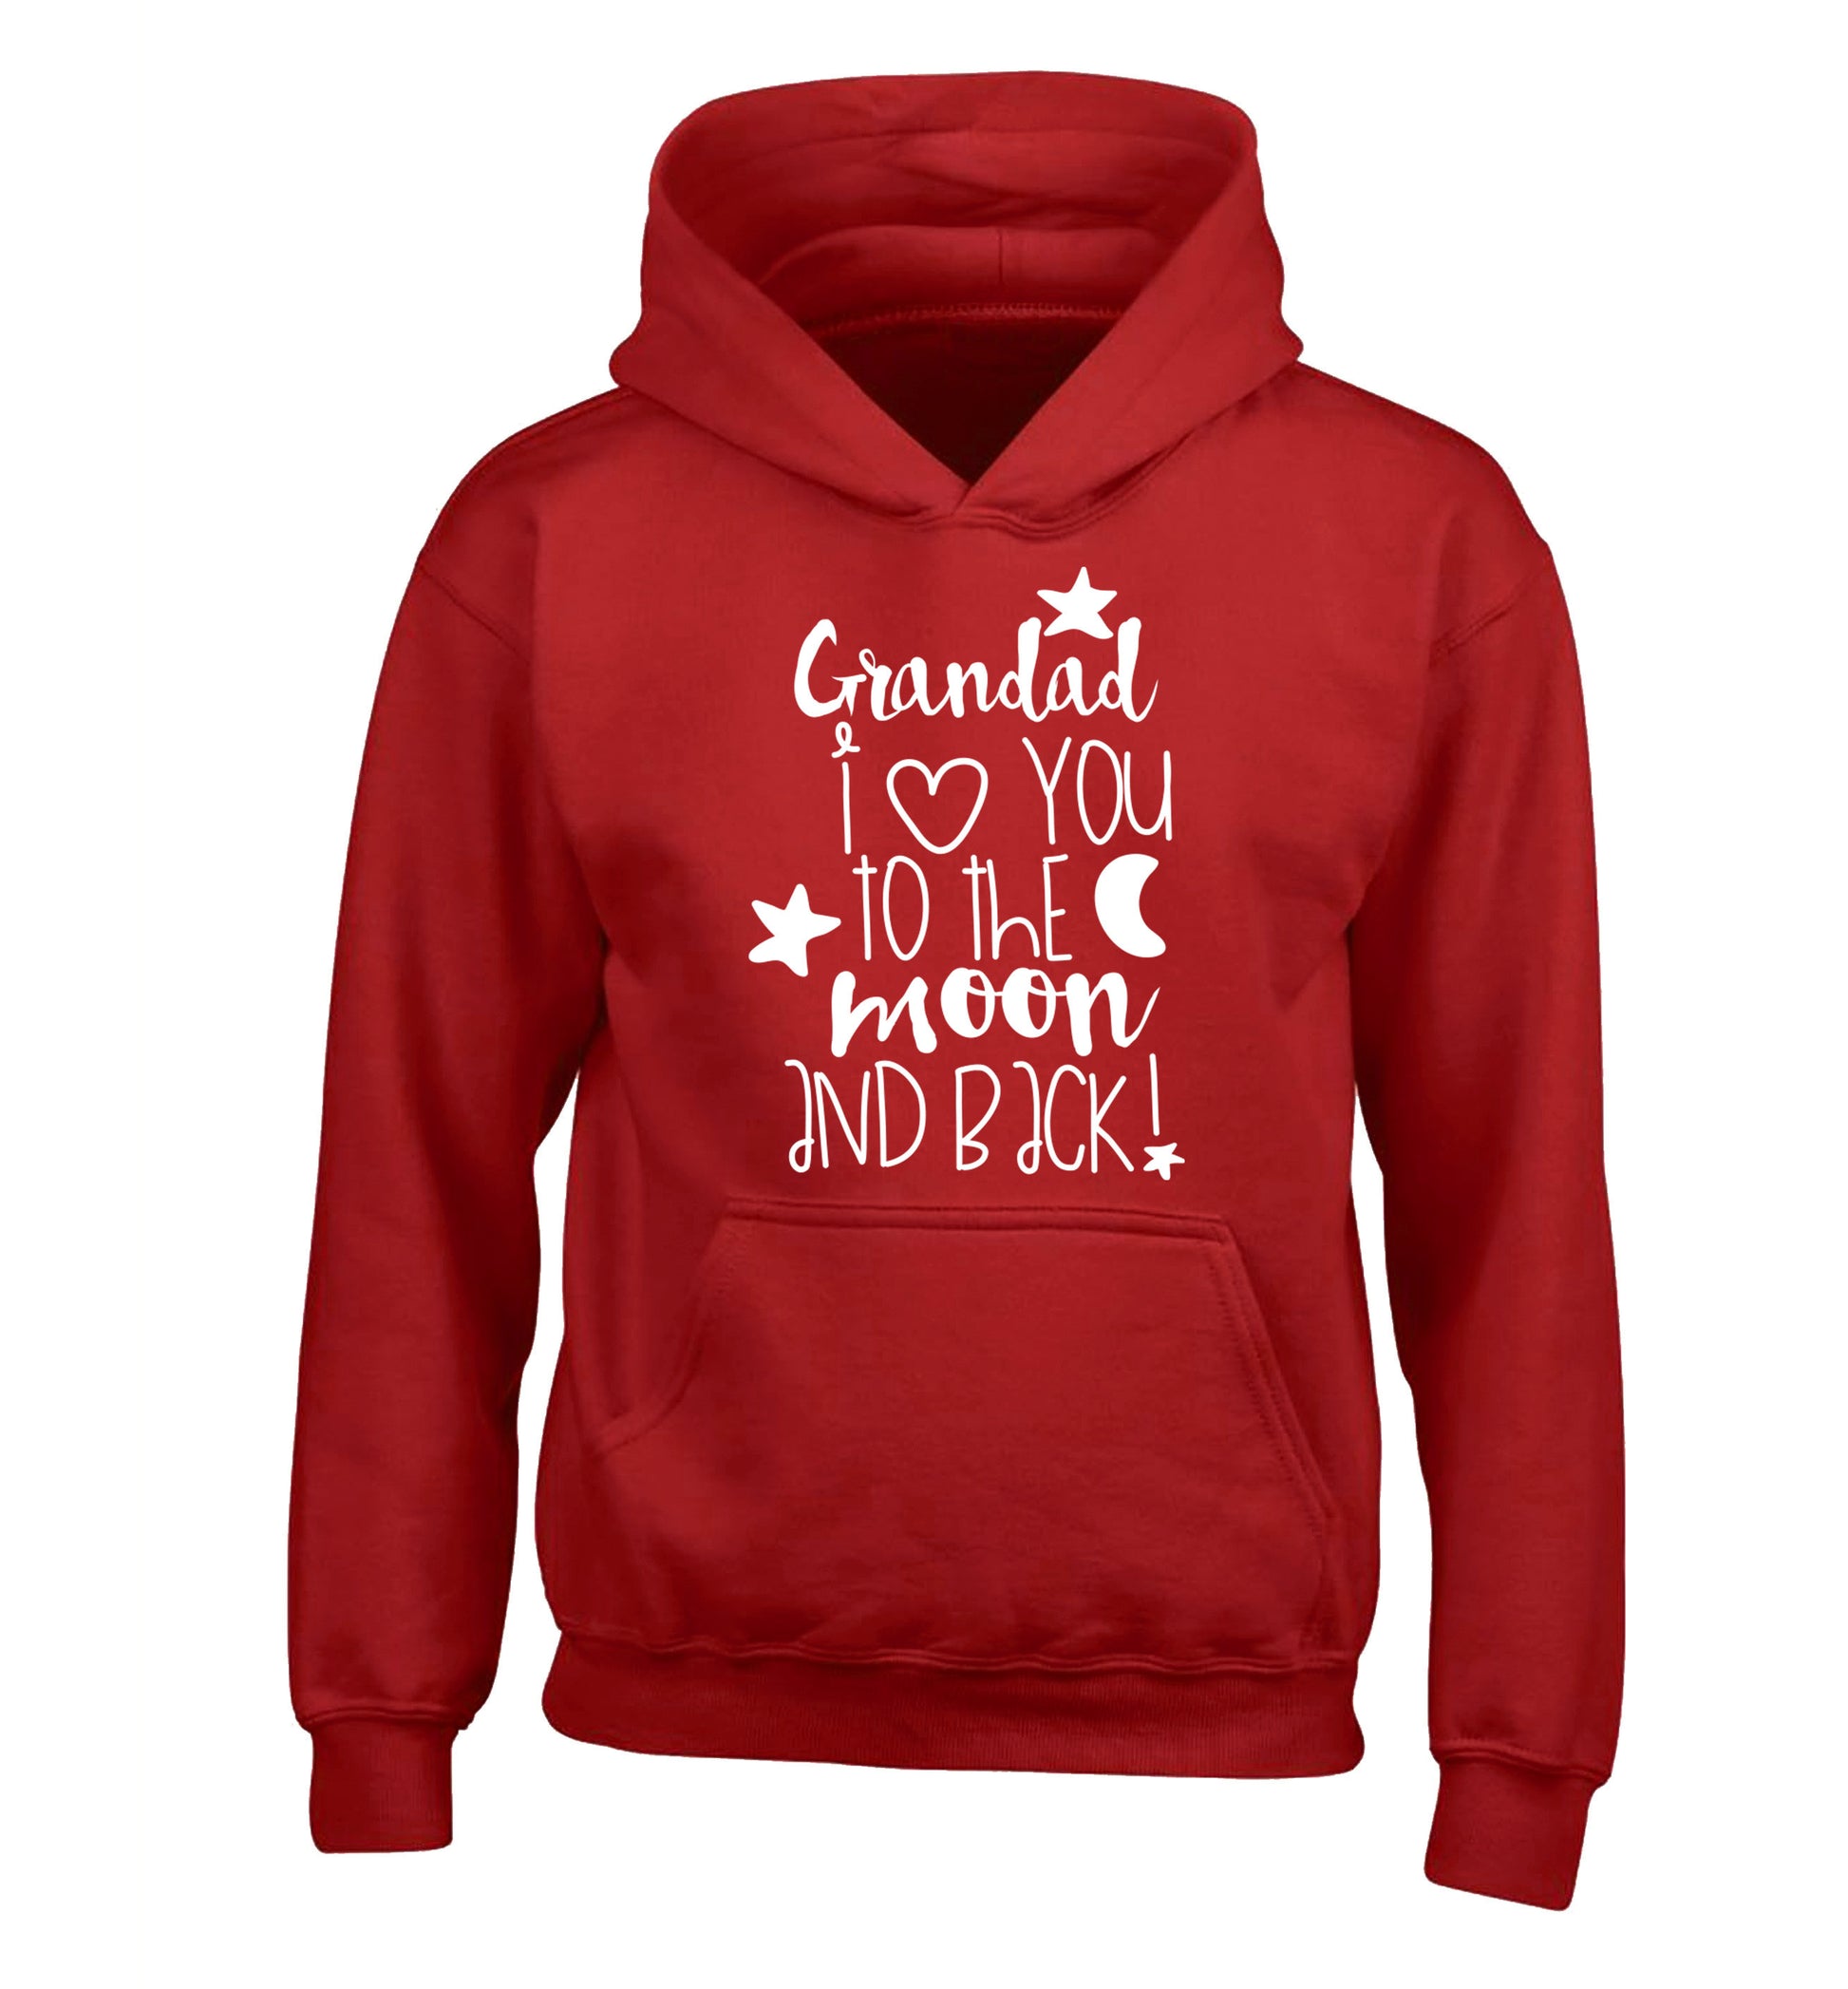 Grandad's I love you to the moon and back children's red hoodie 12-14 Years